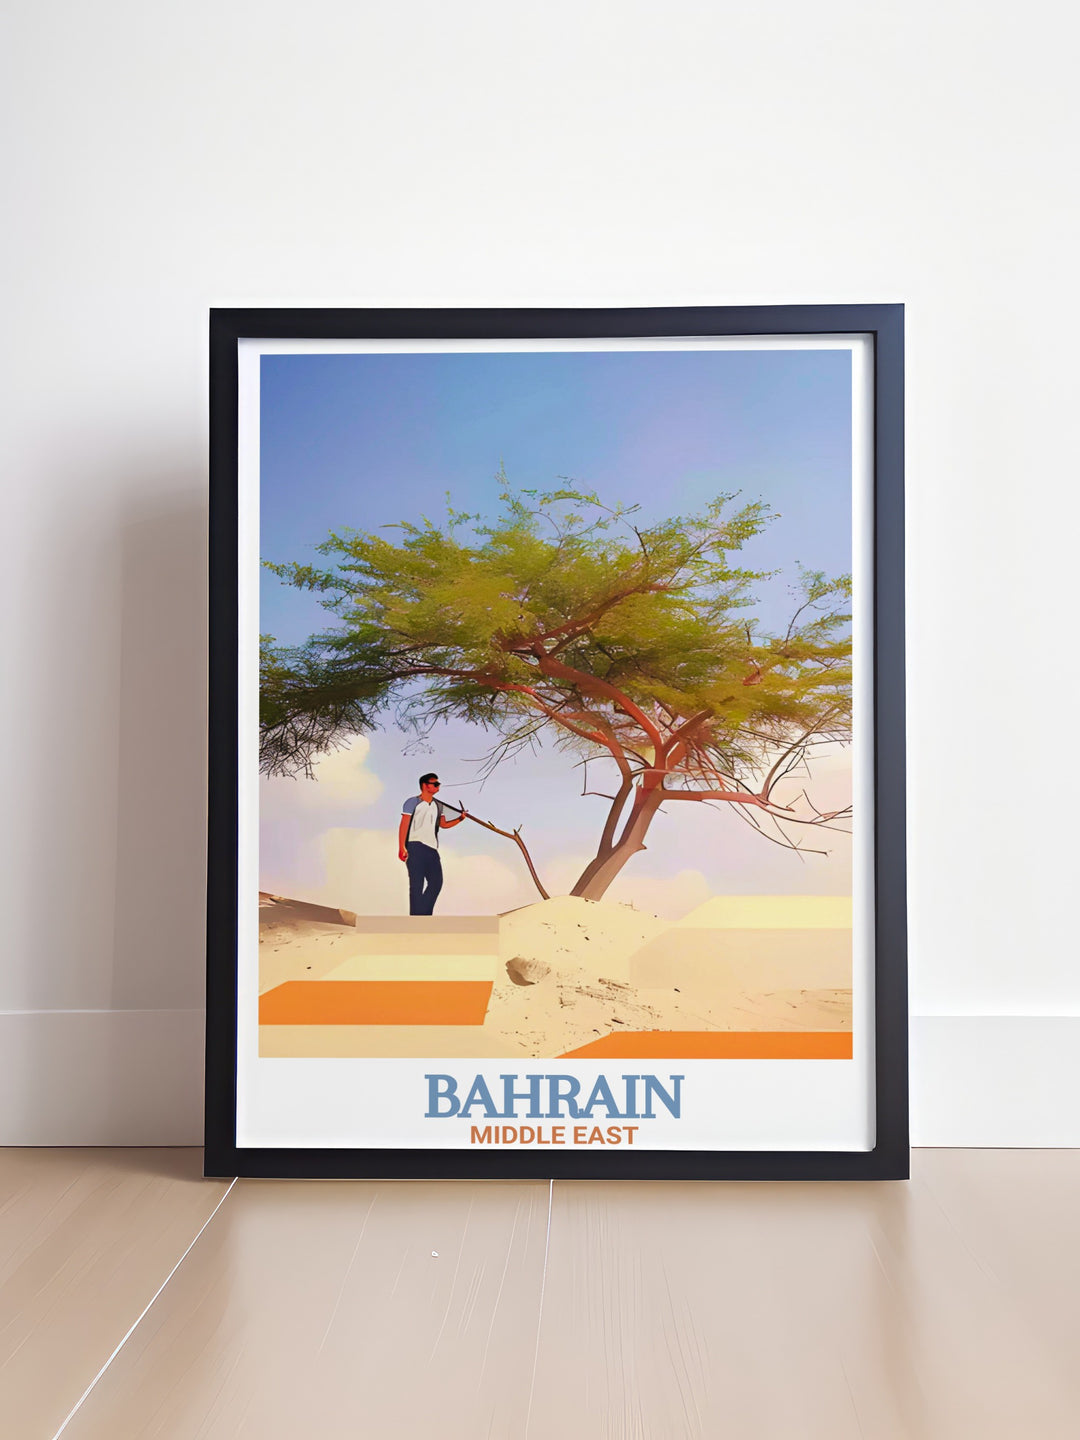 Elegant Bahrain Travel Print of the Tree of Life capturing the natural wonder and cultural significance of one of the most famous landmarks in Bahrain.